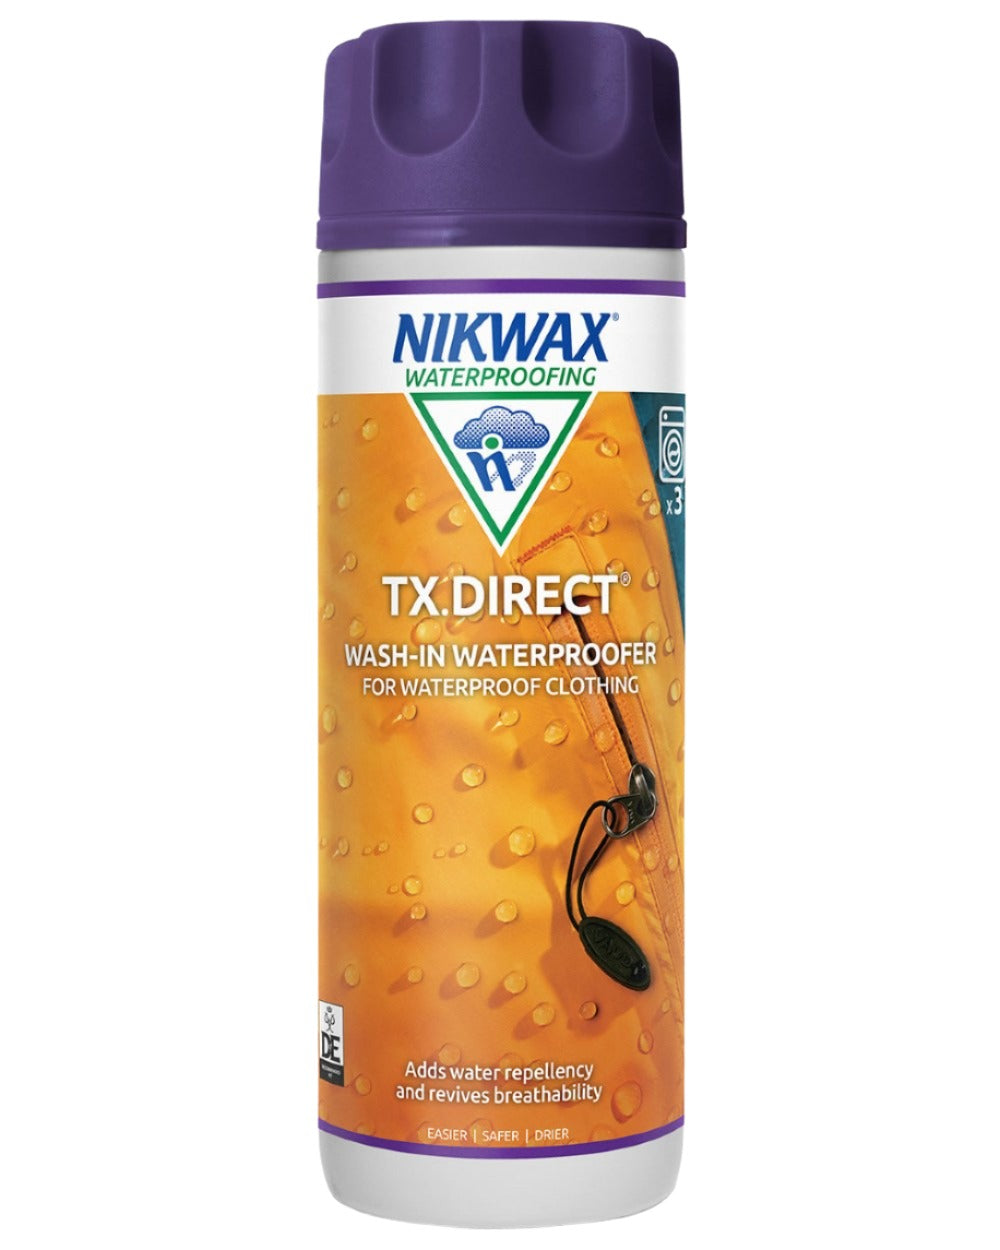 Nikwax TX. Direct Wash In Waterproofer 300ml On A White Background